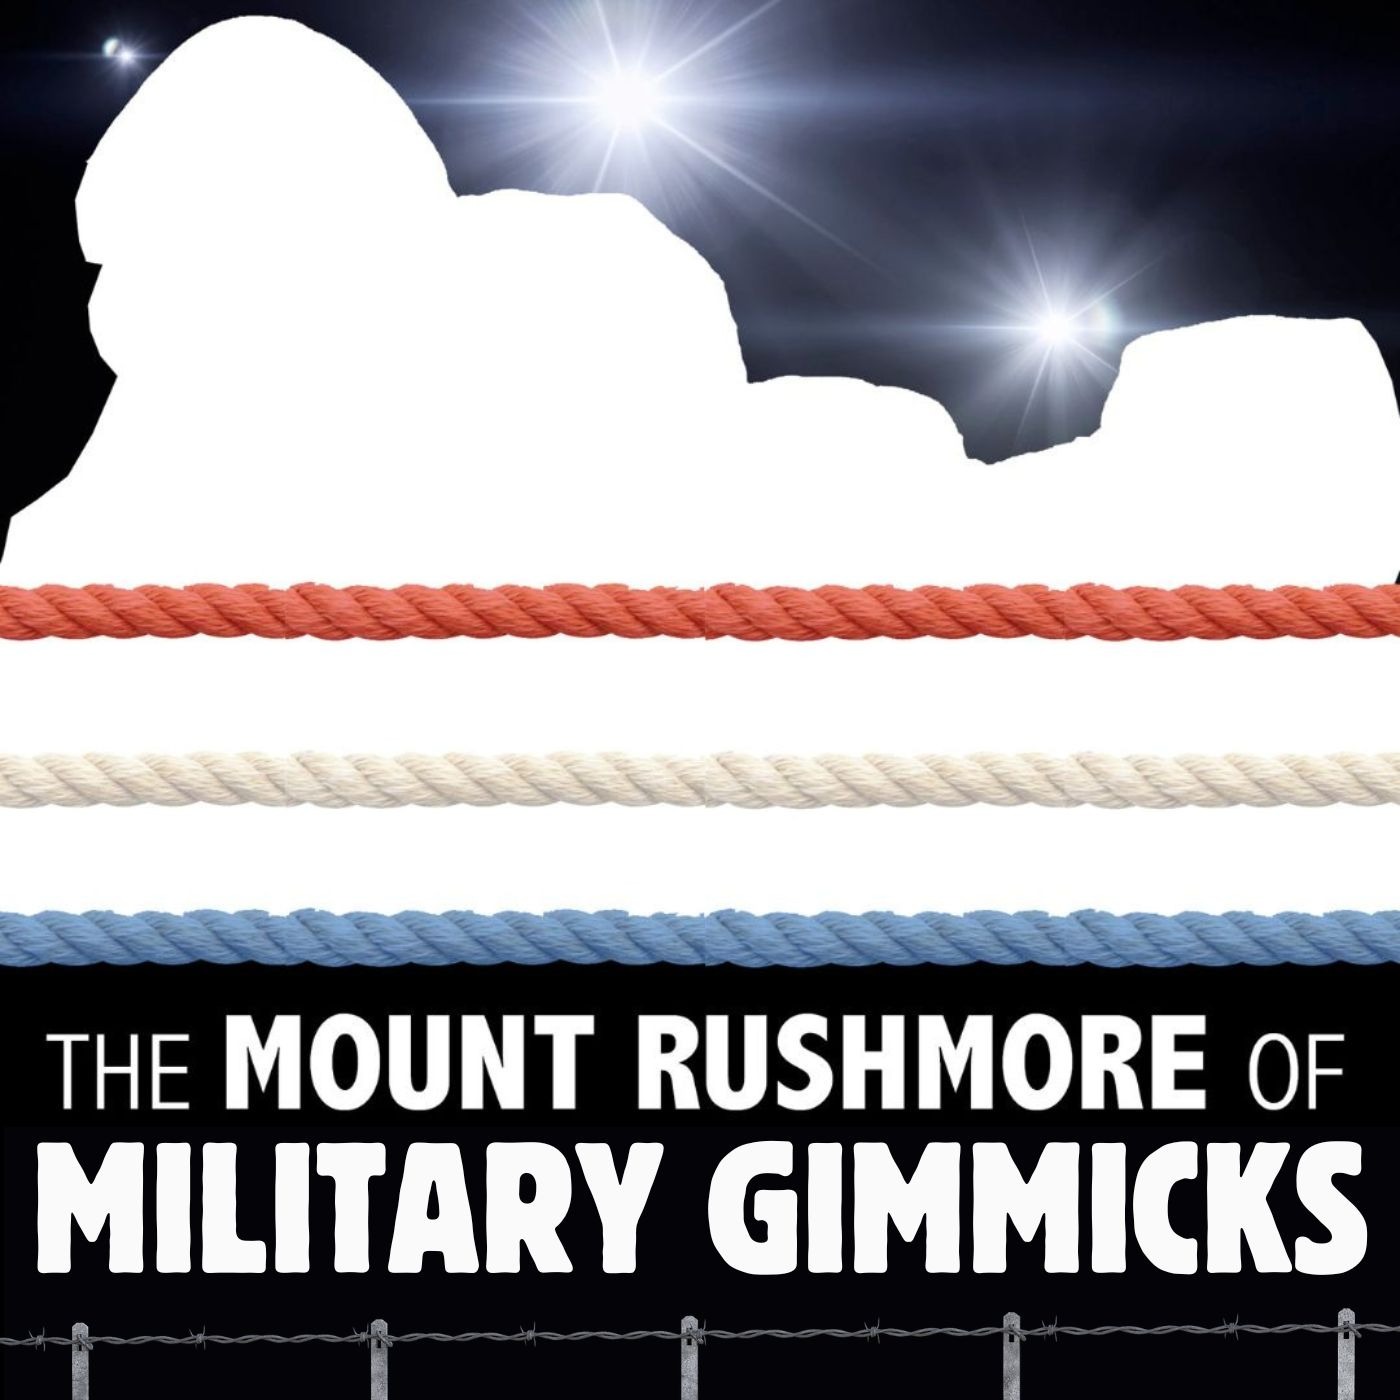 007 The Mount Rushmore of Military Gimmicks